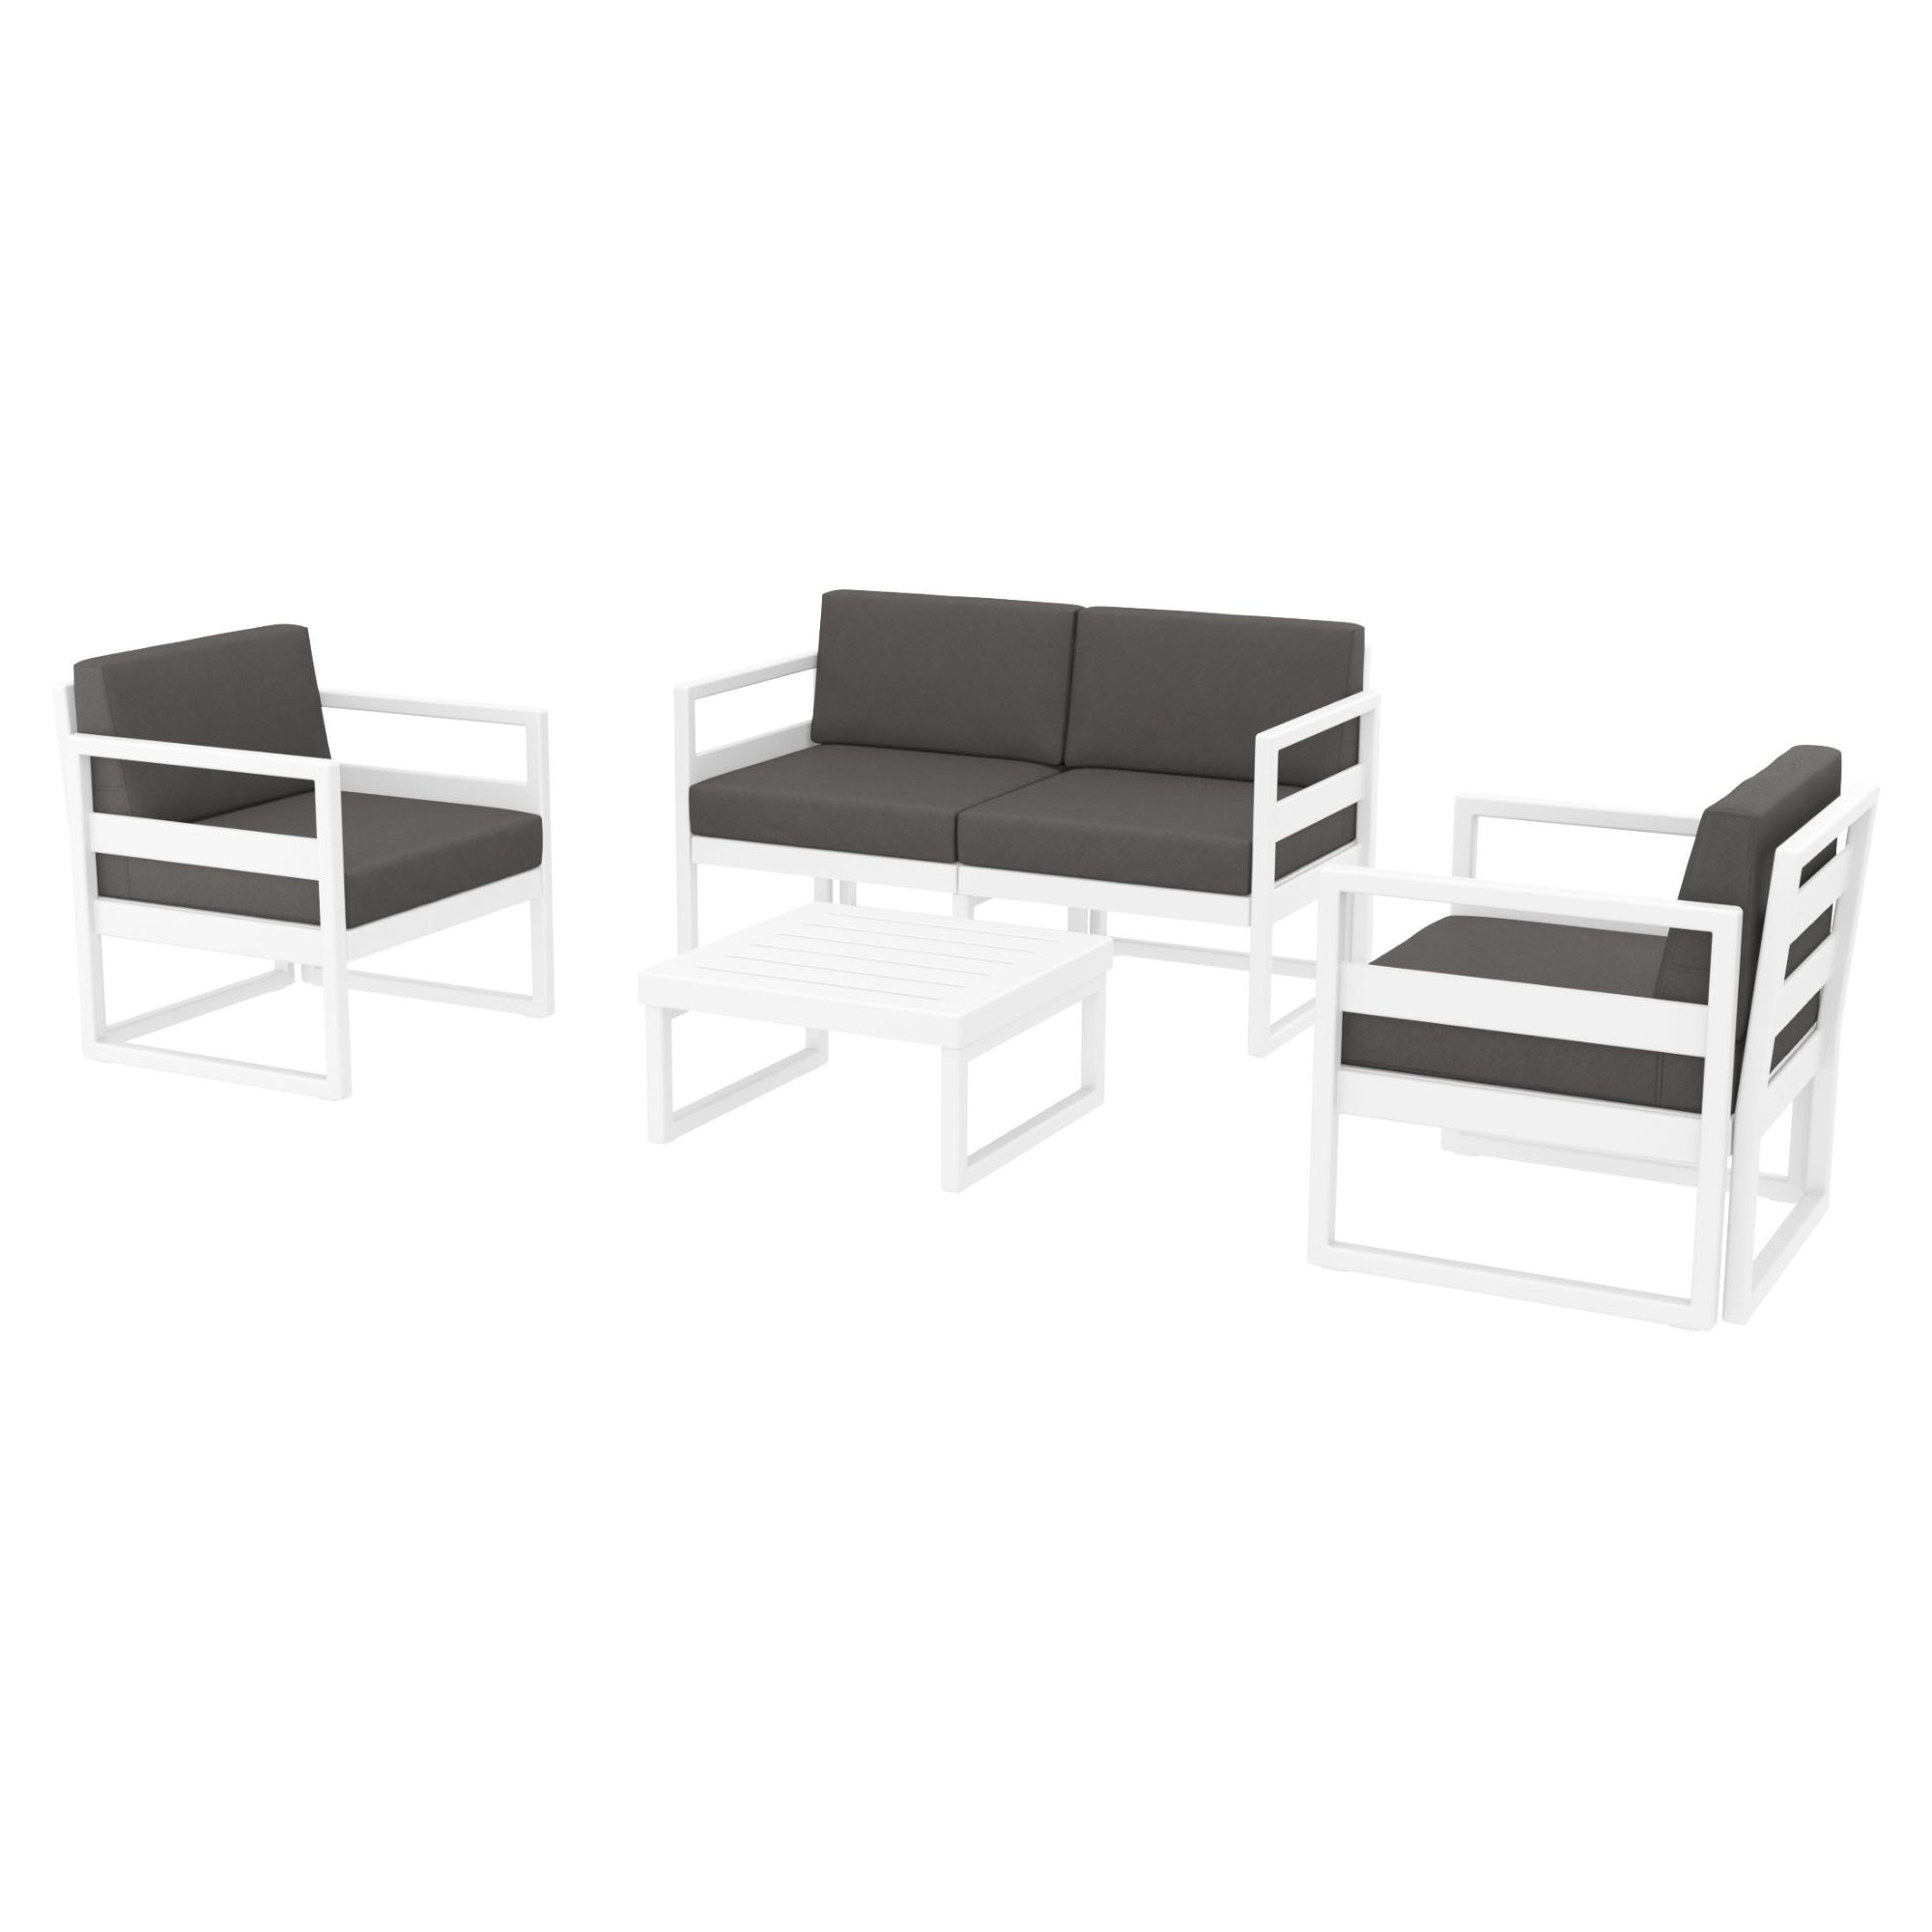 4 Piece White Outdoor Patio Lounge Set with Charcoal Sunbrella Cushion 54.5" - image 1 of 4